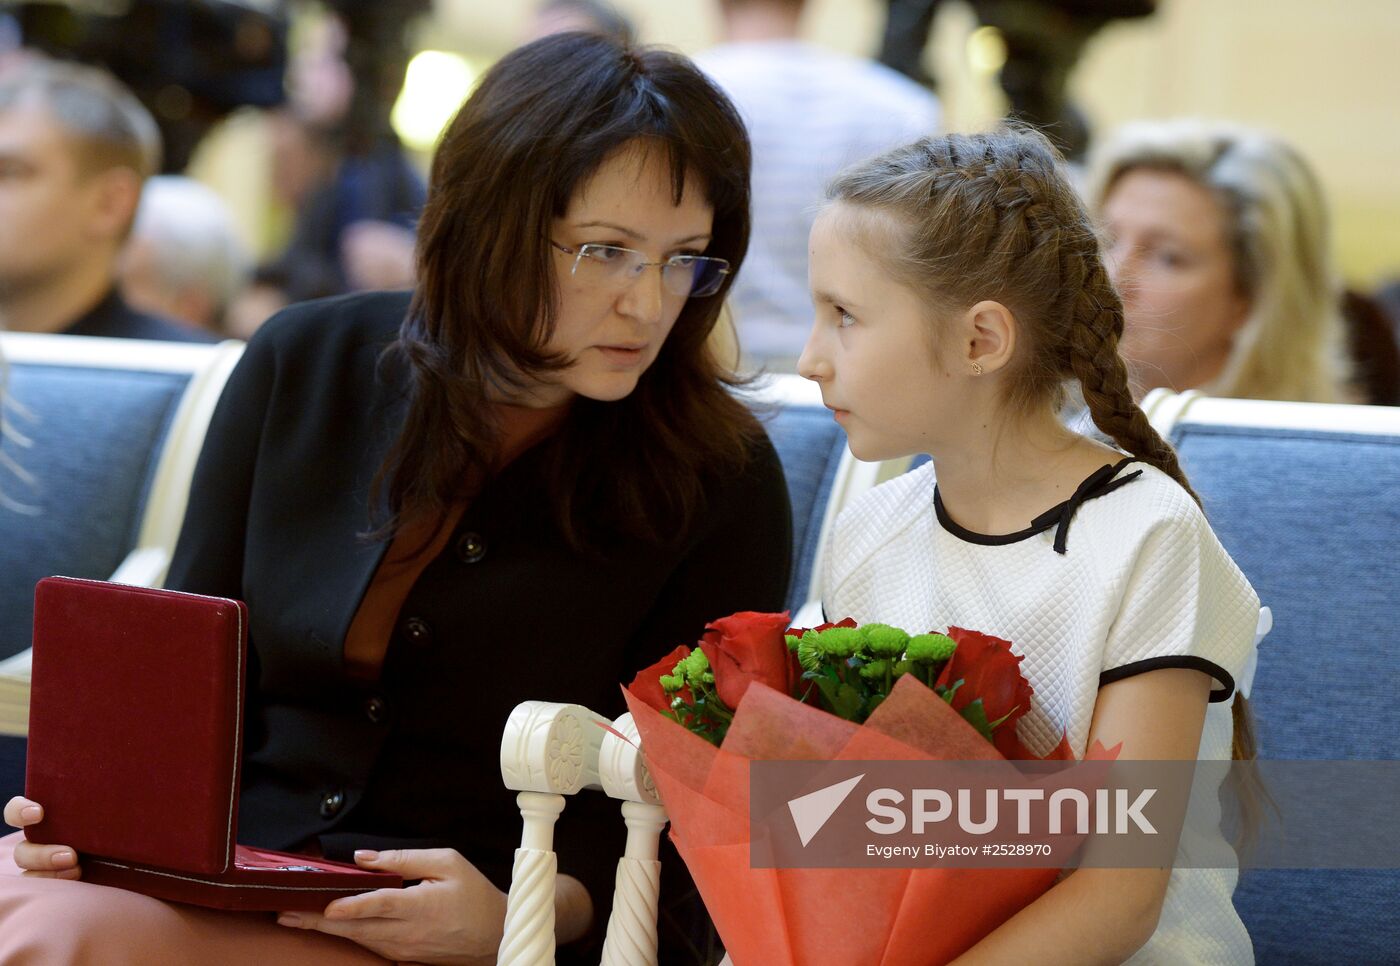 State awards presented to relatives of journalists killed in eastern Ukraine